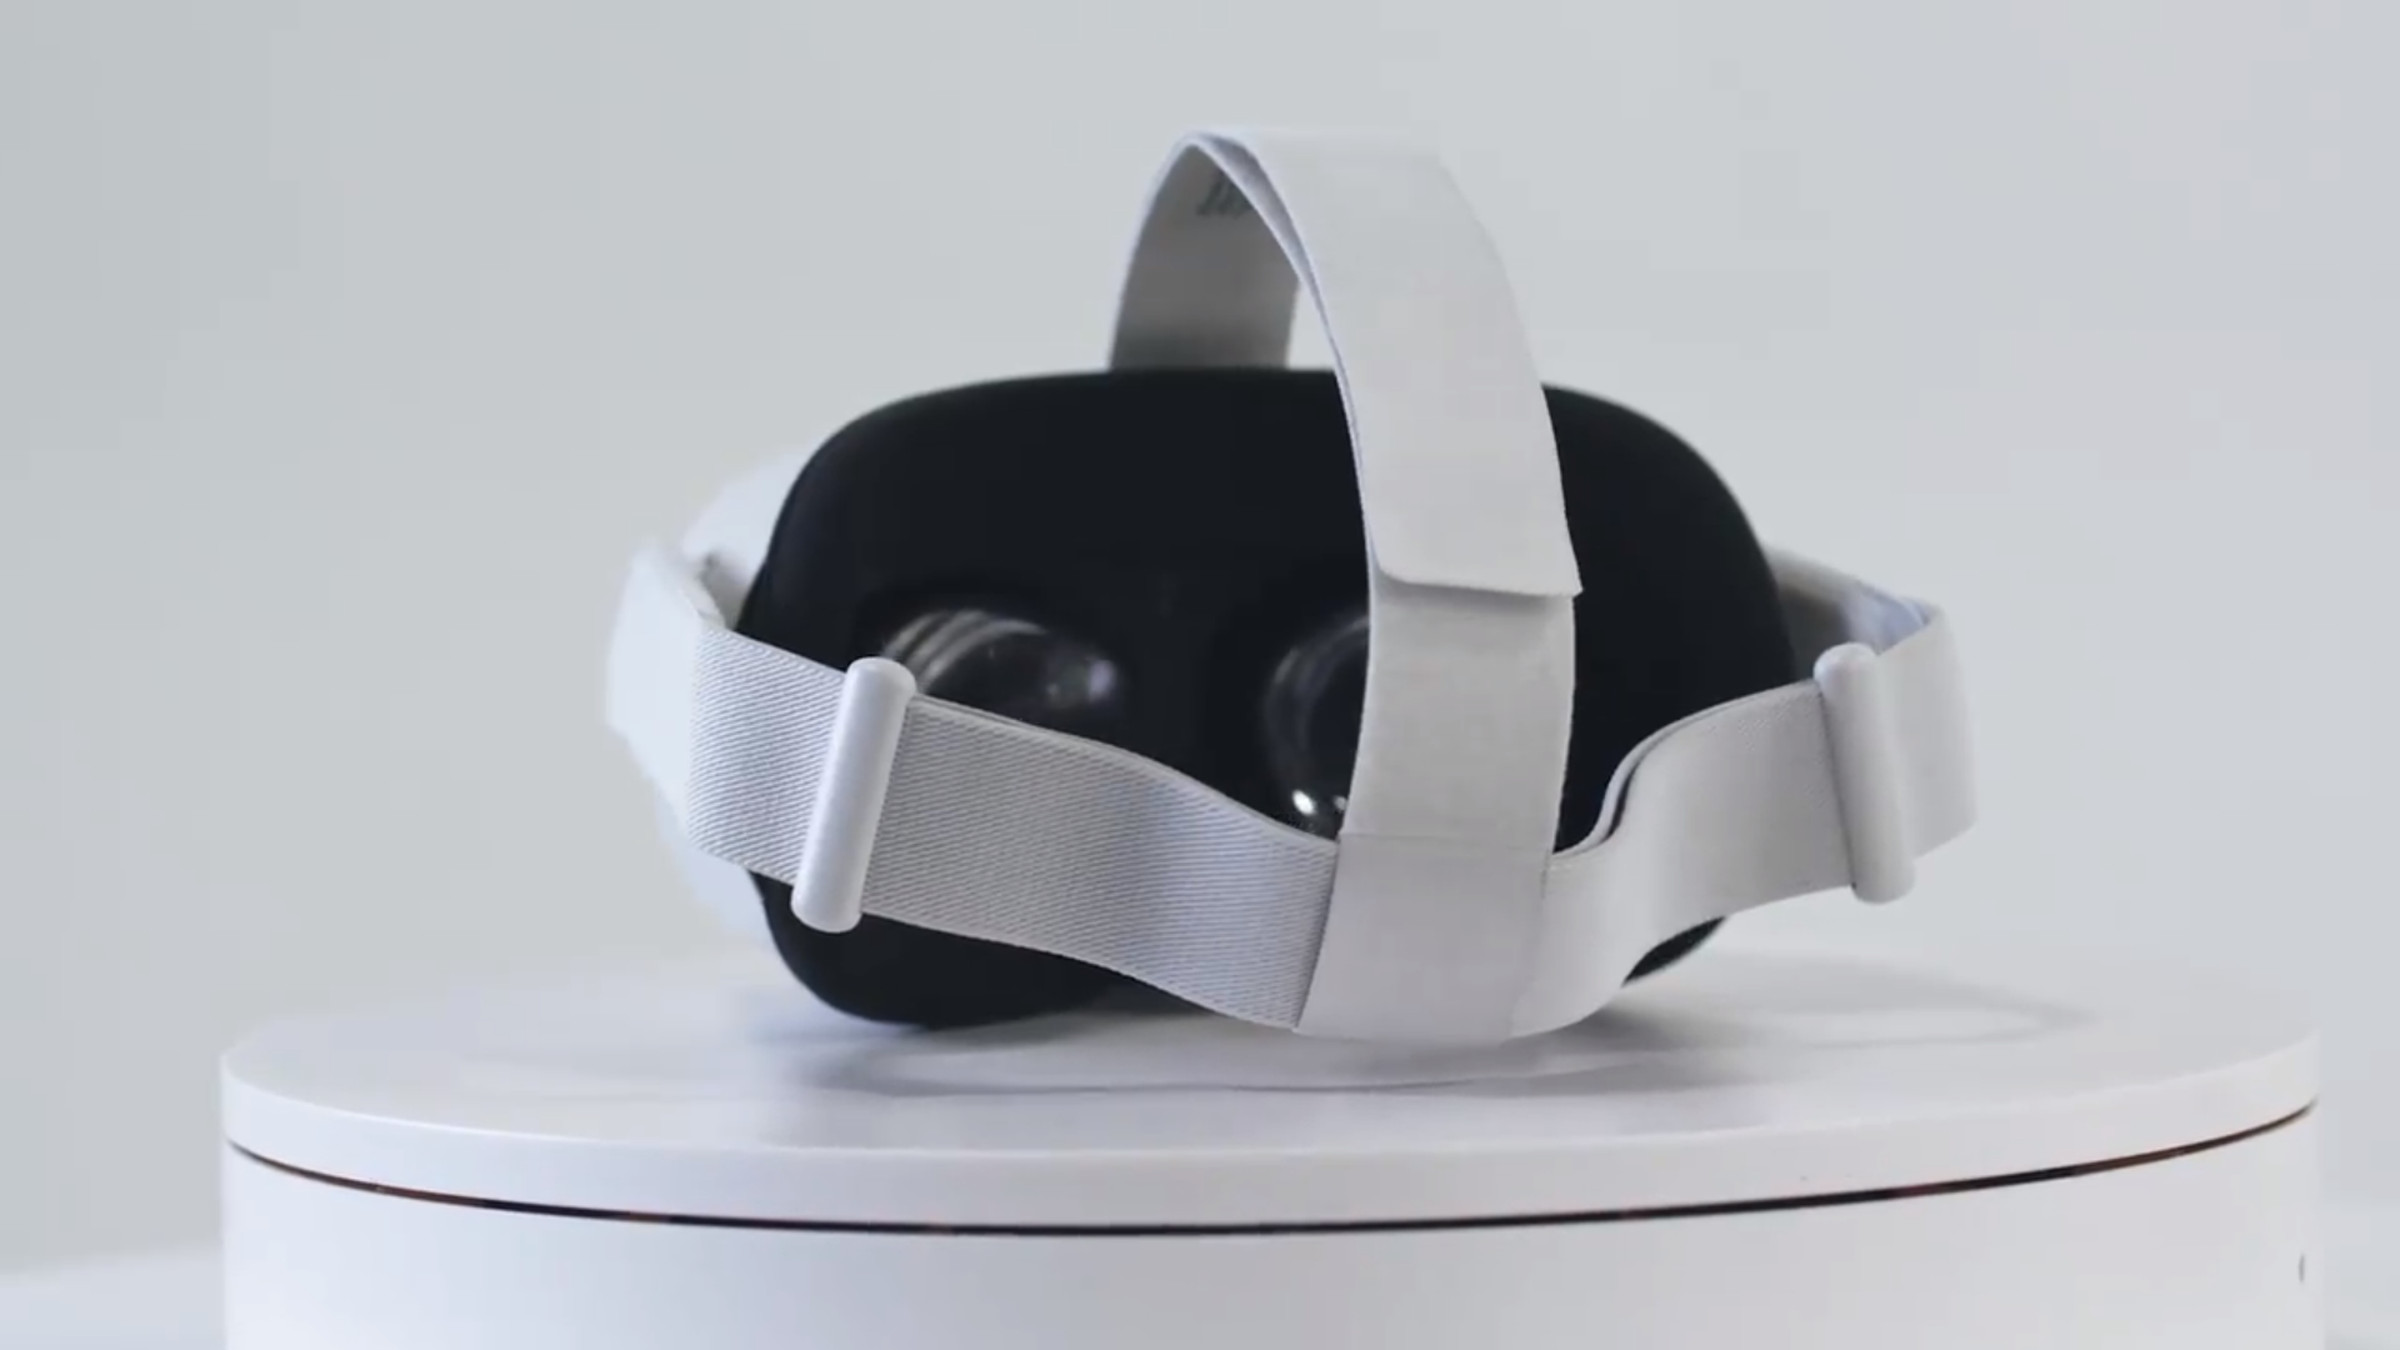 Oculus says the new strap makes it easier to slip the headset on and off.